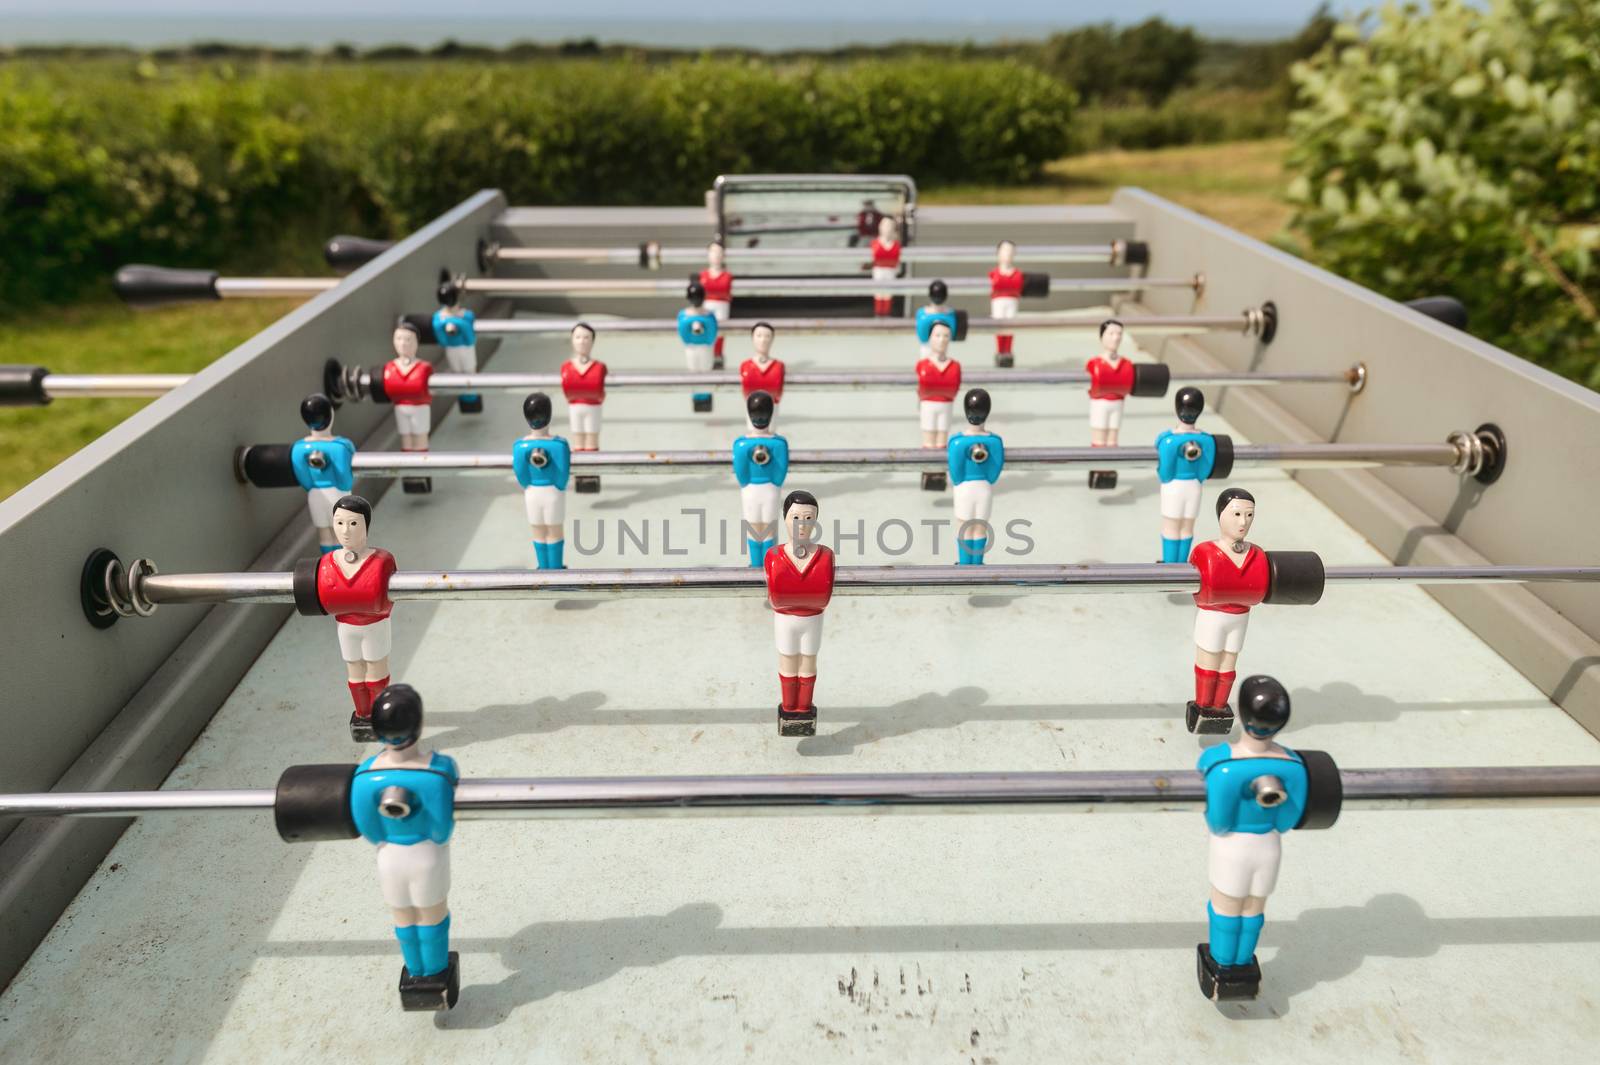 Outdoor table football, baby foot or baby soccer by mbruxelle